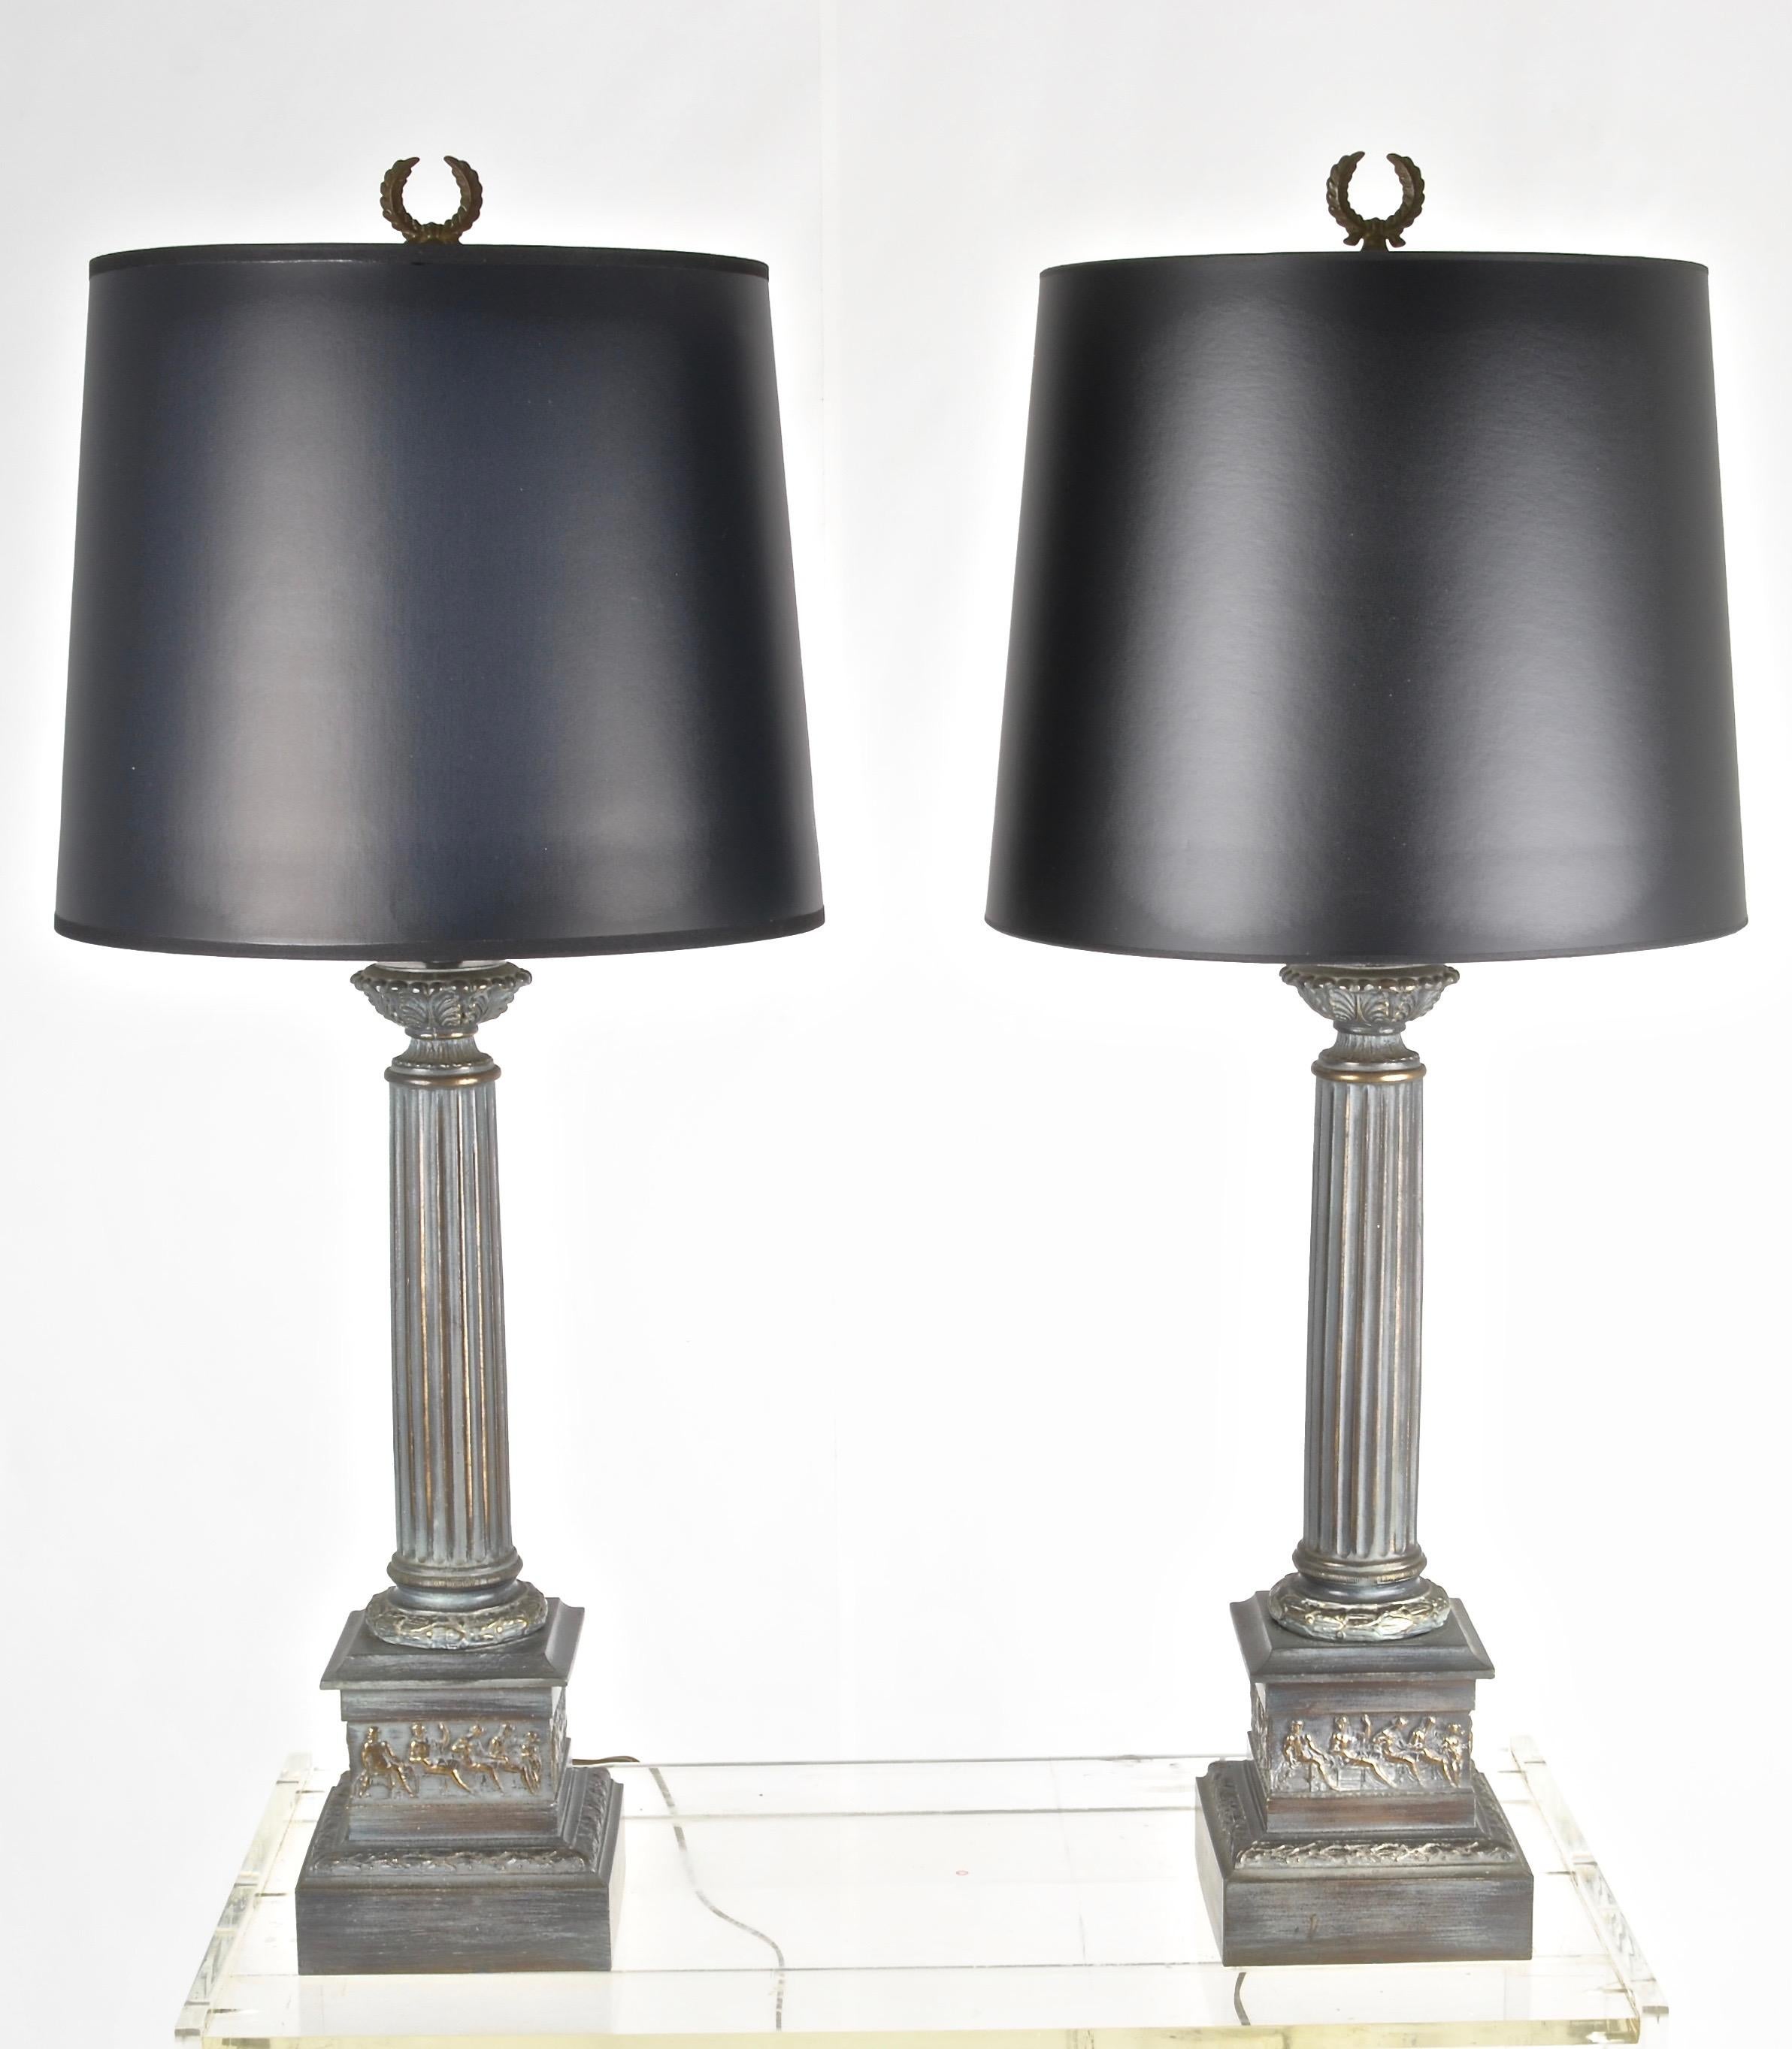 A handsome pair of metal lamps, featuring a neoclassical motif in a verdigris bronze finish. All new wiring and three-way sockets in bronze tone. New shades opaque black paper. Height to the top of the socket is 24.5 inches; to the top of the finial